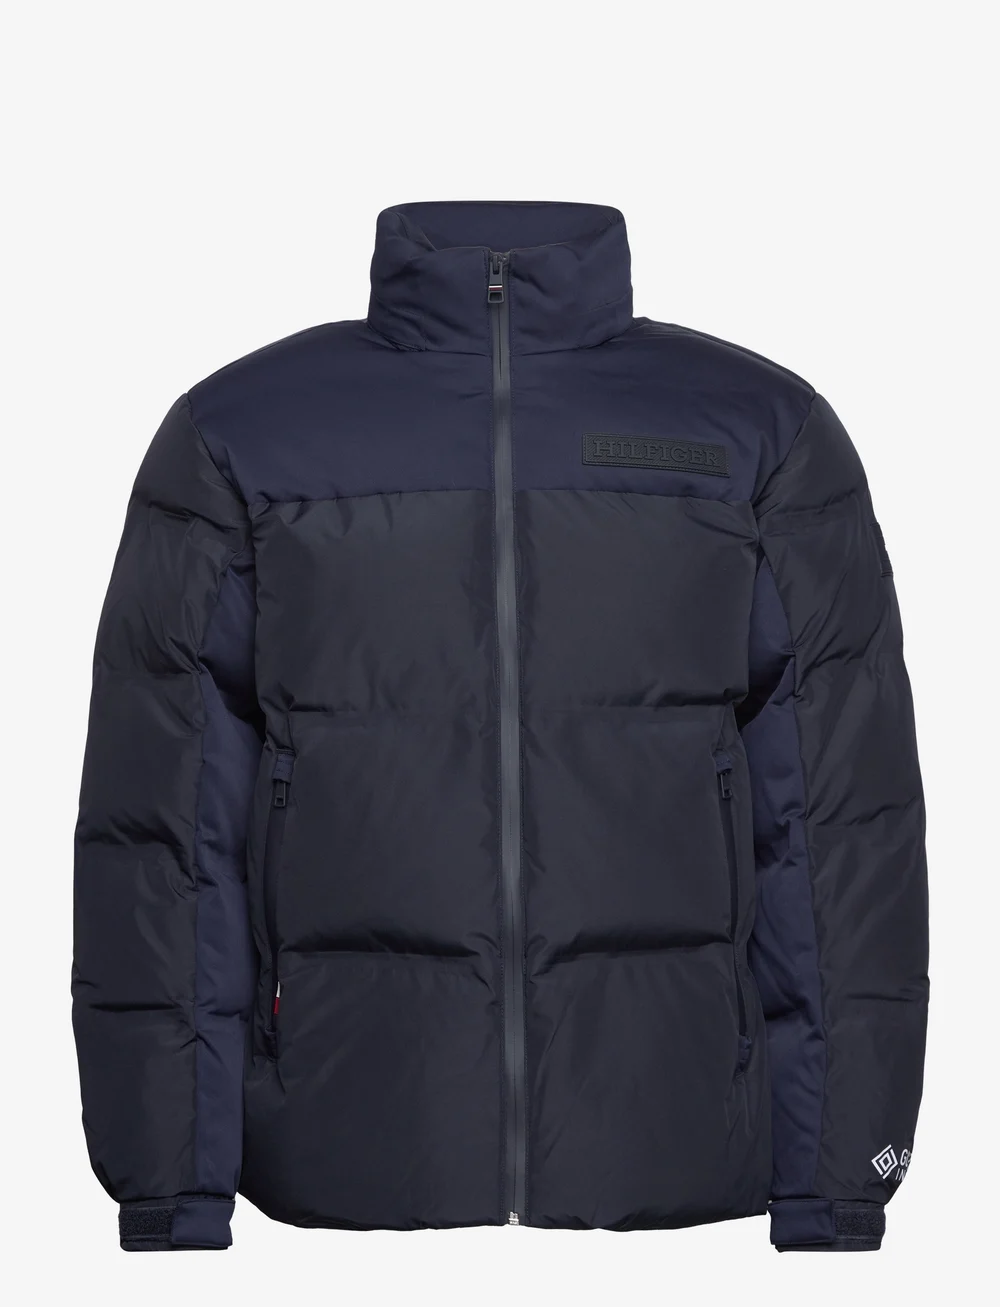 Tommy Hilfiger New York Gore-tex Puffer Jacket - 208.95 €. Buy Padded  jackets from Tommy Hilfiger online at . Fast delivery and easy  returns